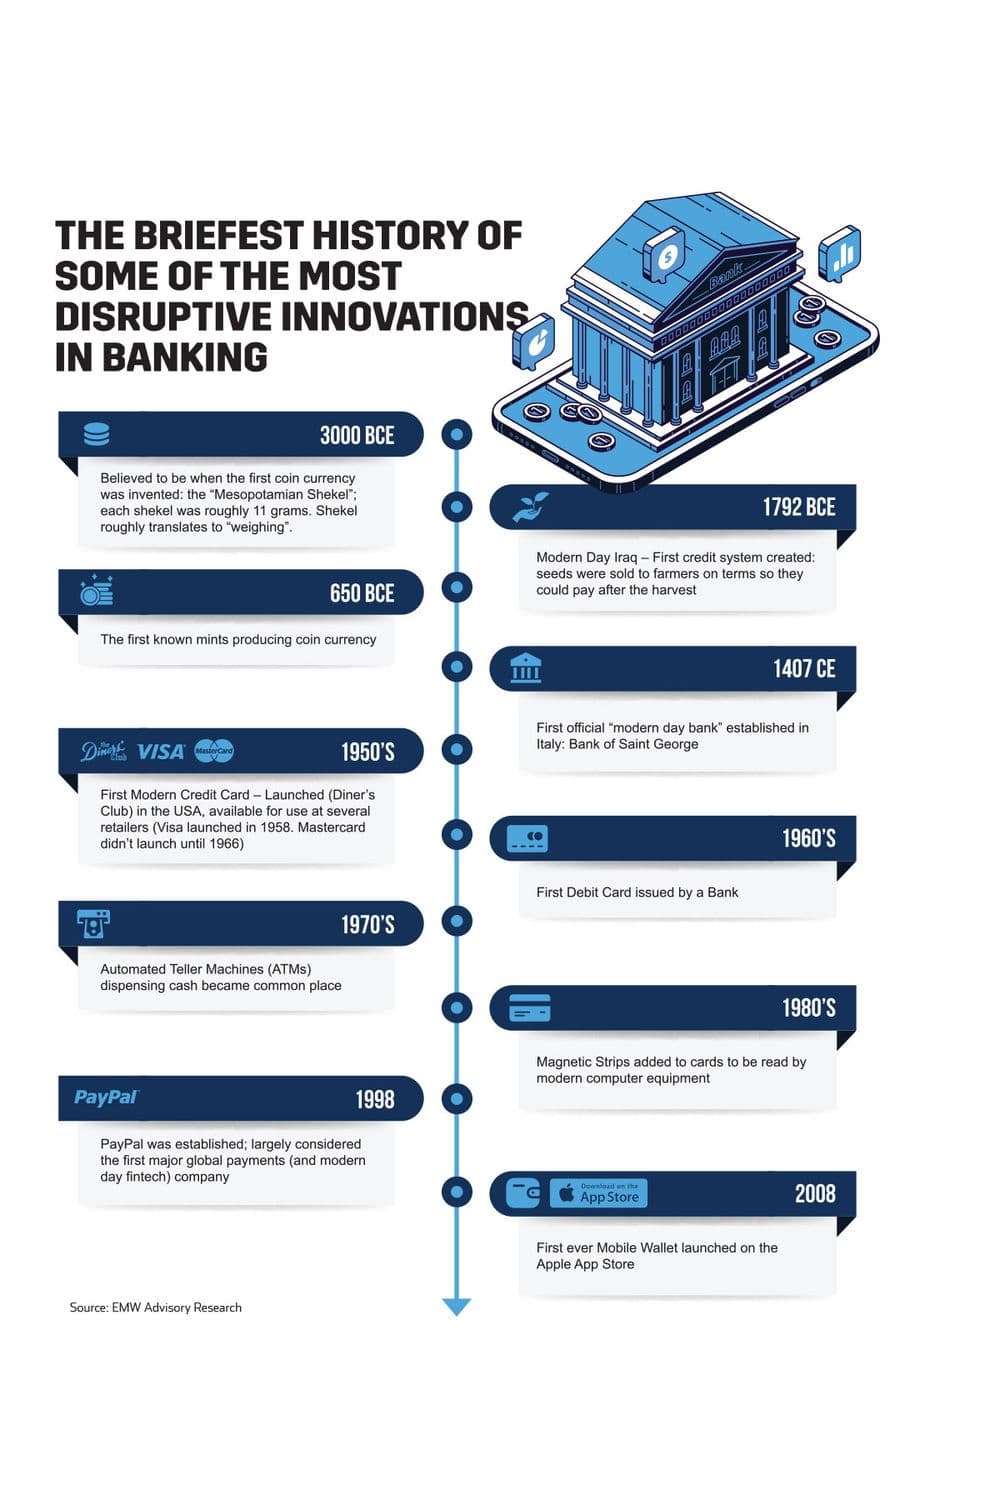 The briefest history of some of the most disruptive innovations in banking